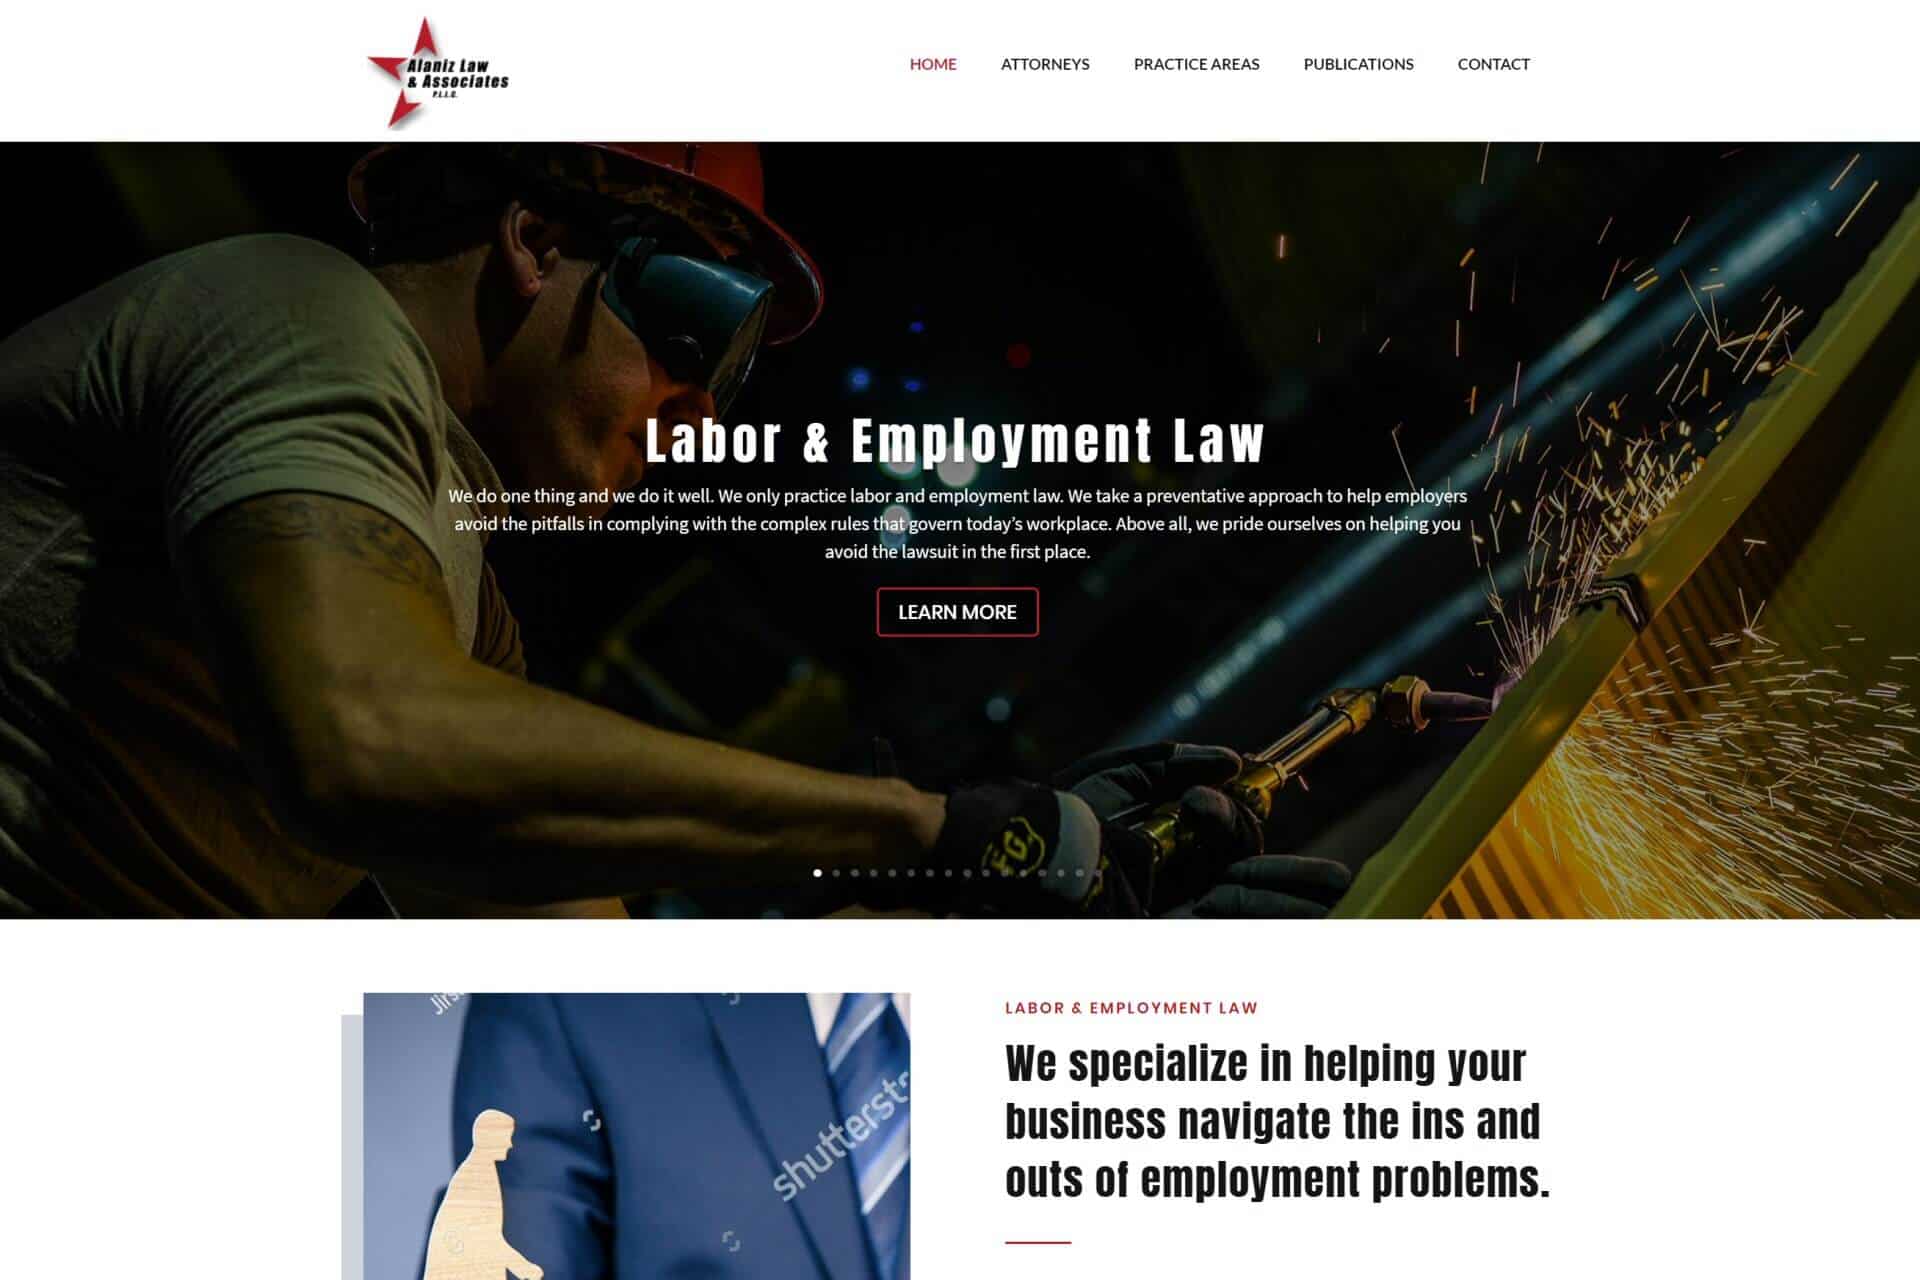 Alaniz Law and Associates by Impeccable Network Services